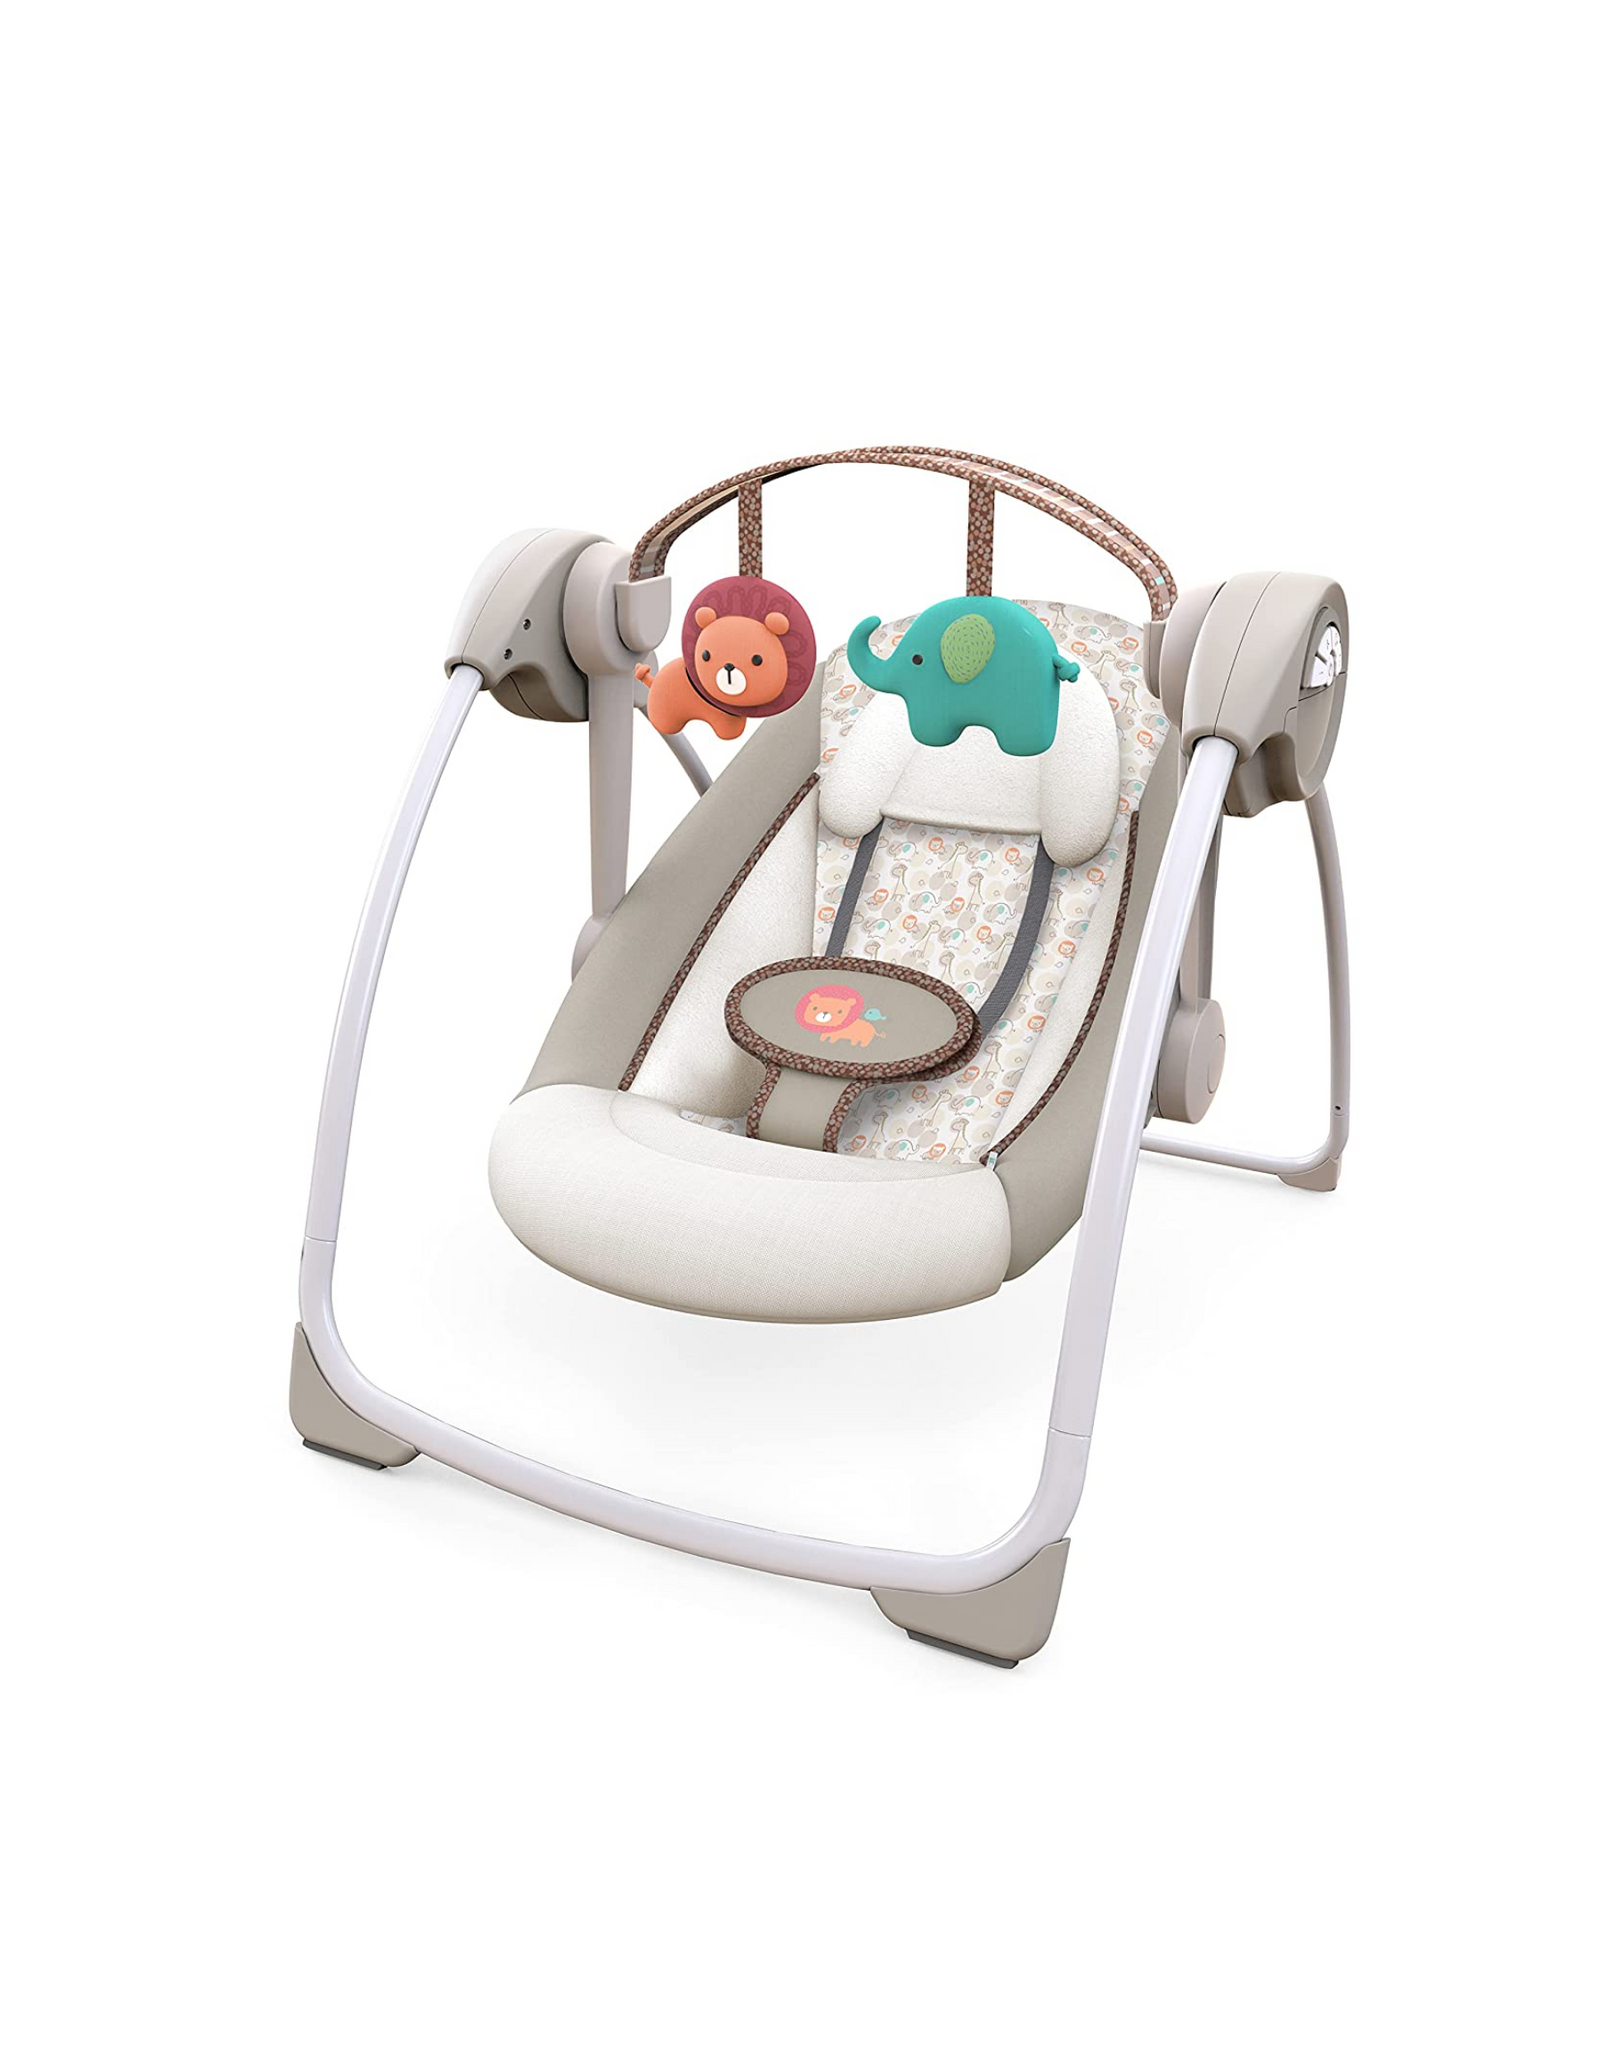 Ingenuity Soothe 'n Delight 6-Speed Compact Portable Baby Swing with Music, Cozy Kingdom, Brown